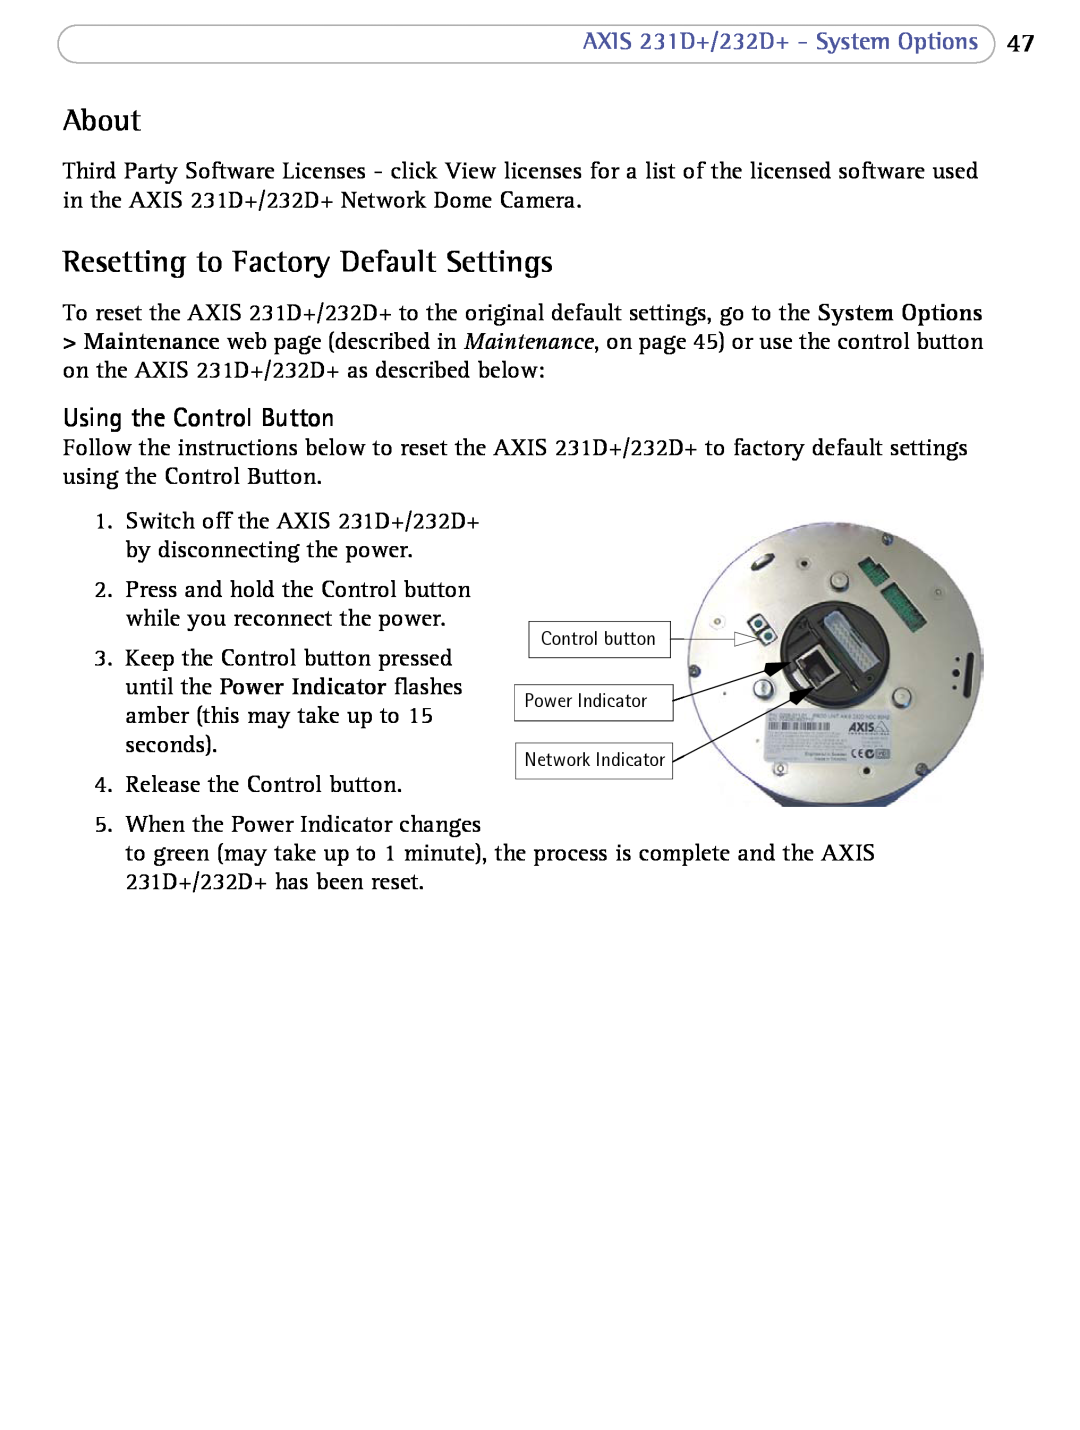 Axis Communications 231D+, 232d+ user manual About, Resetting to Factory Default Settings, Using the Control Button 